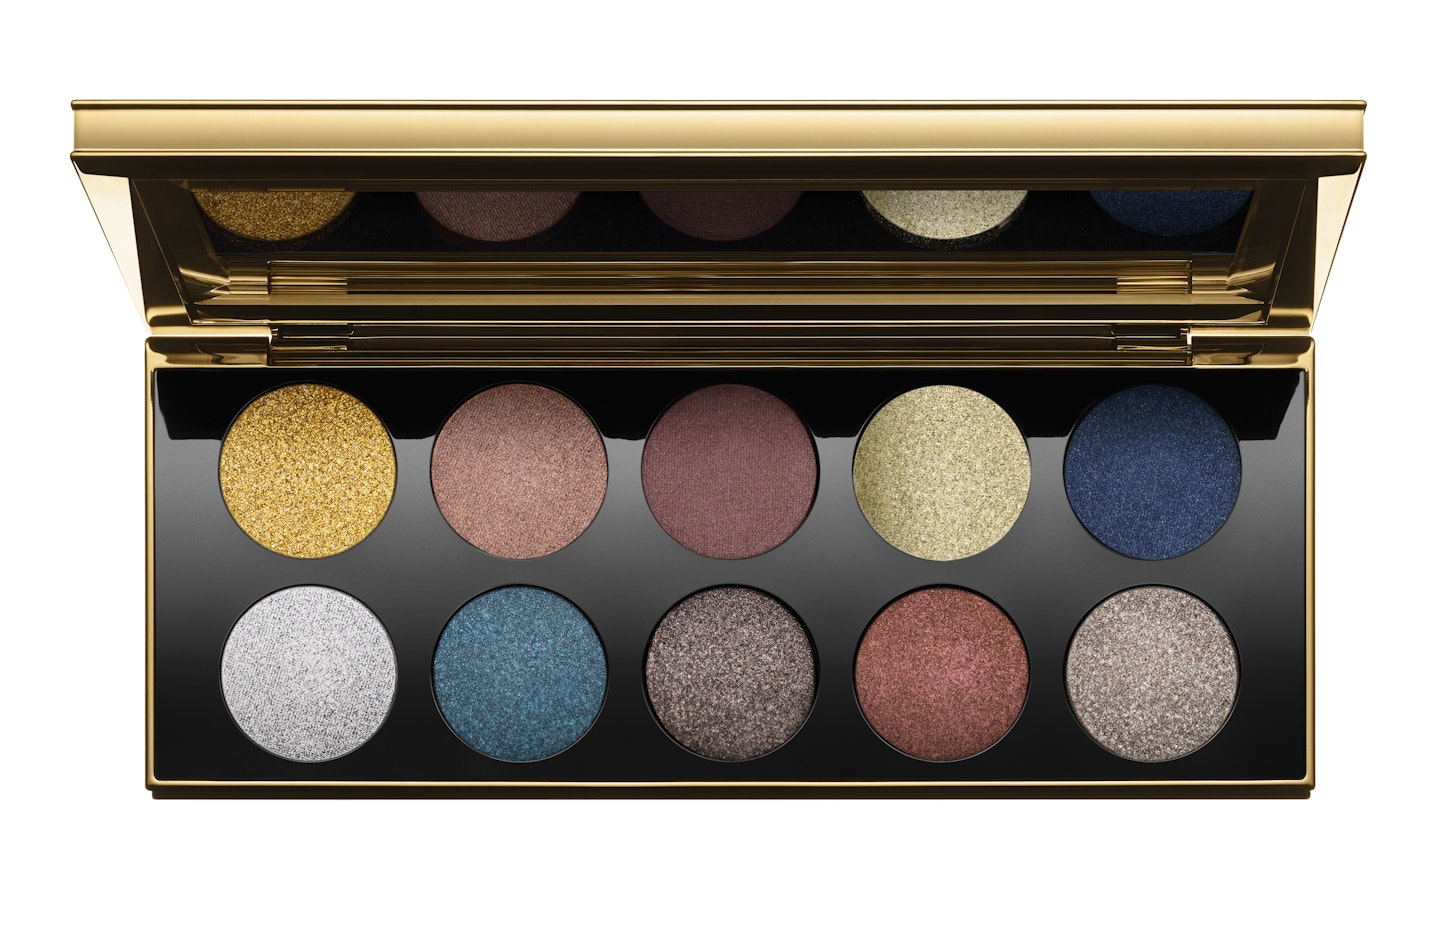 Pat McGrath Labs Mothershop IV Decadence, £115 (available 26th December)